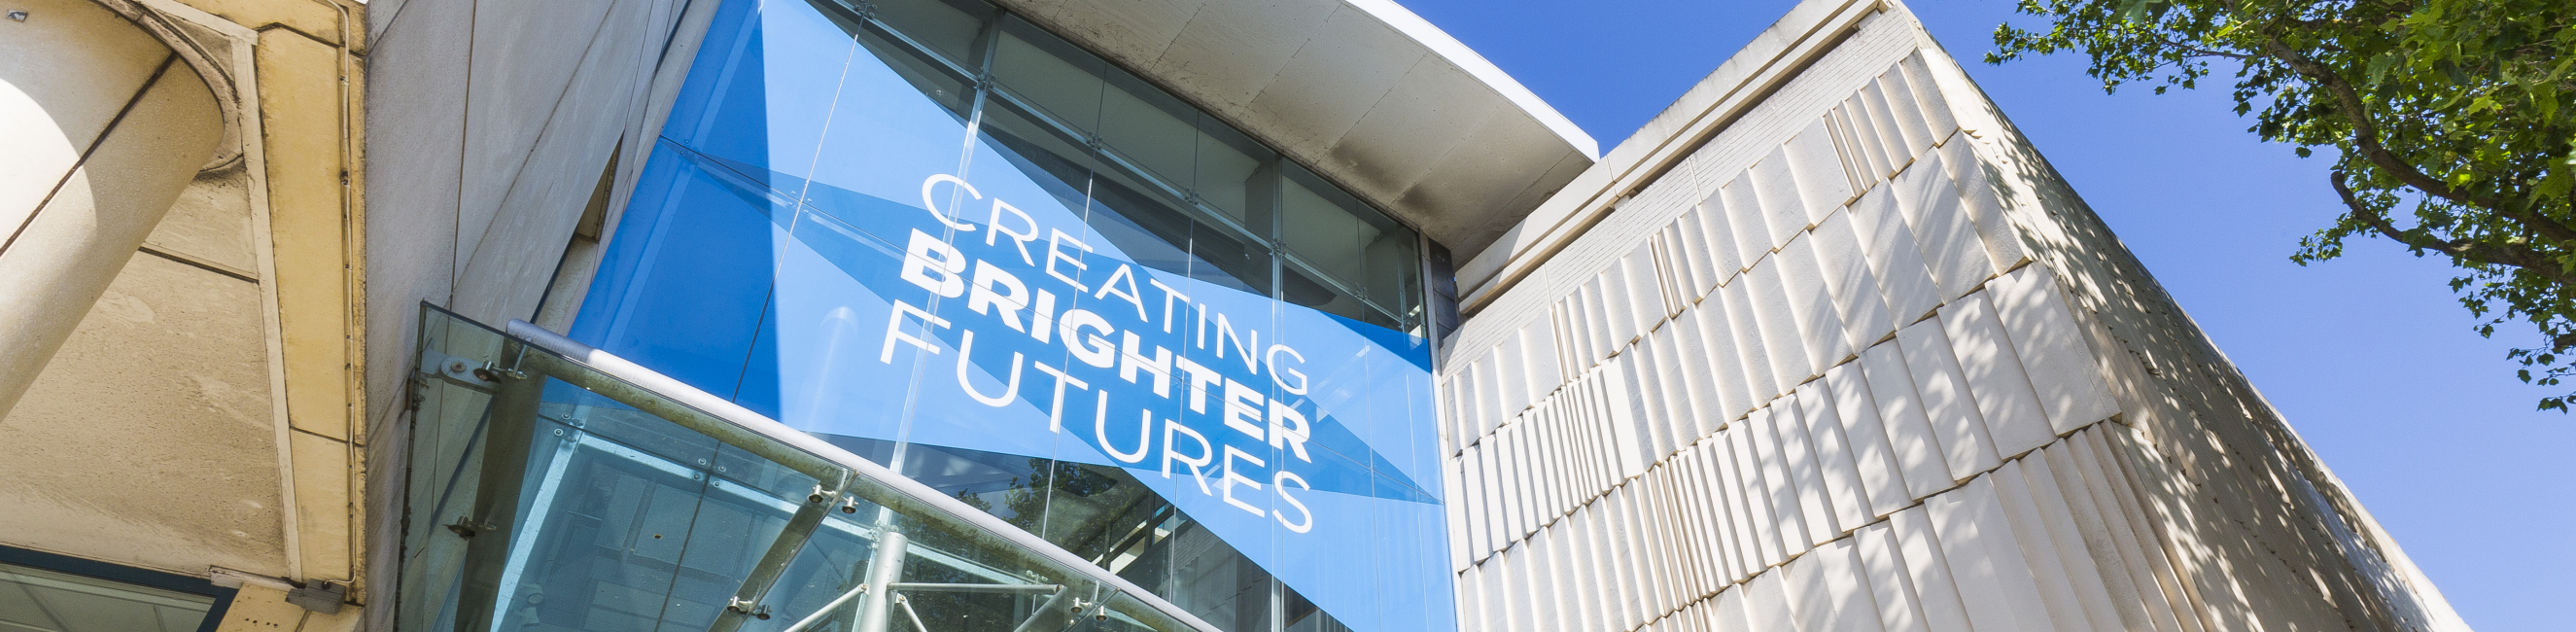 Outside Weston College Knightstone Campus with sign that says "Creating Brighter Futures"